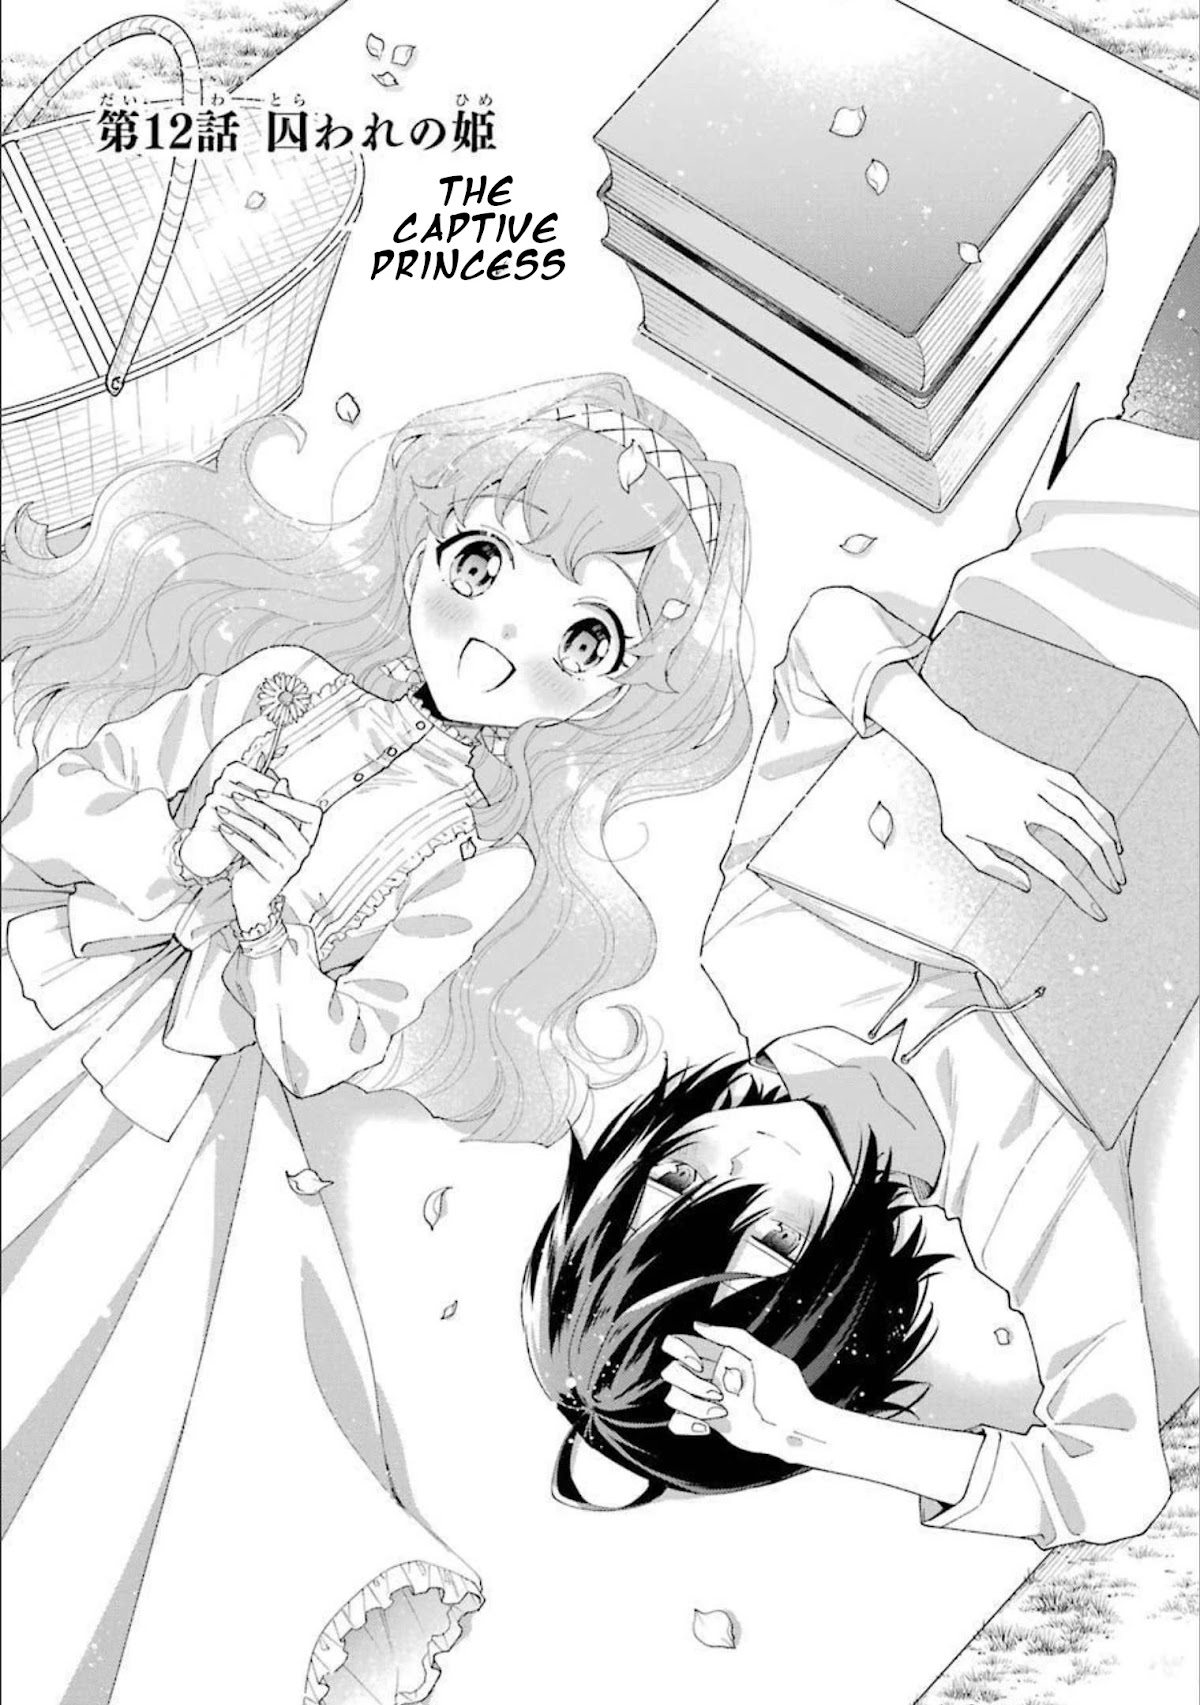 The Noble Girl With A Crush On A Plain And Studious Guy Finds The Arrogant Prince To Be A Nuisance Chapter 12: The Captive Princess - Picture 1